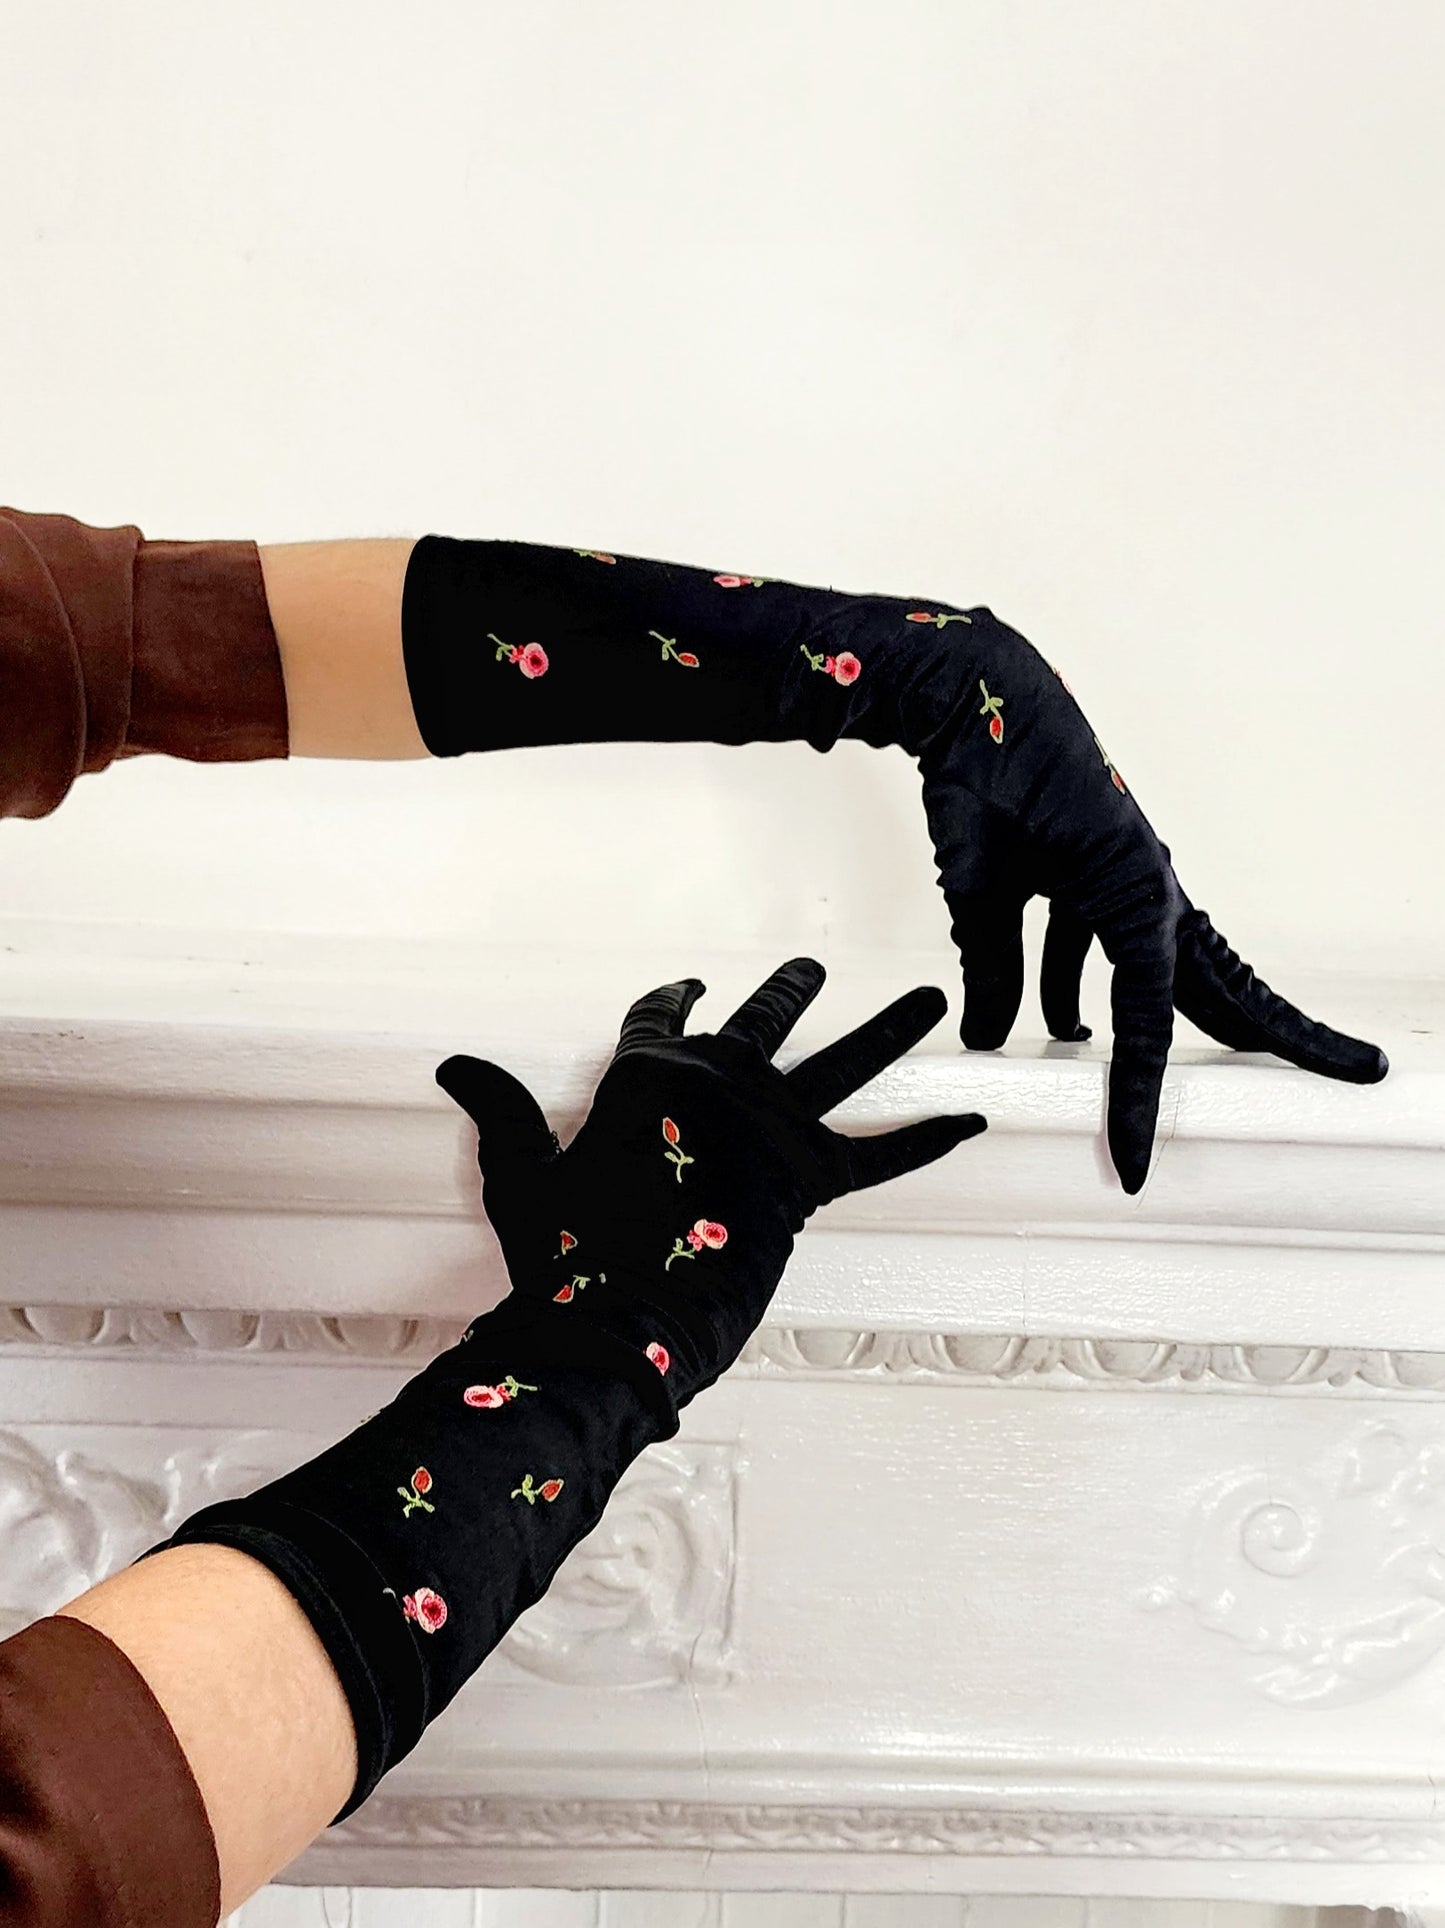 1950s Black Satin Gloves Pink Floral Embroidery